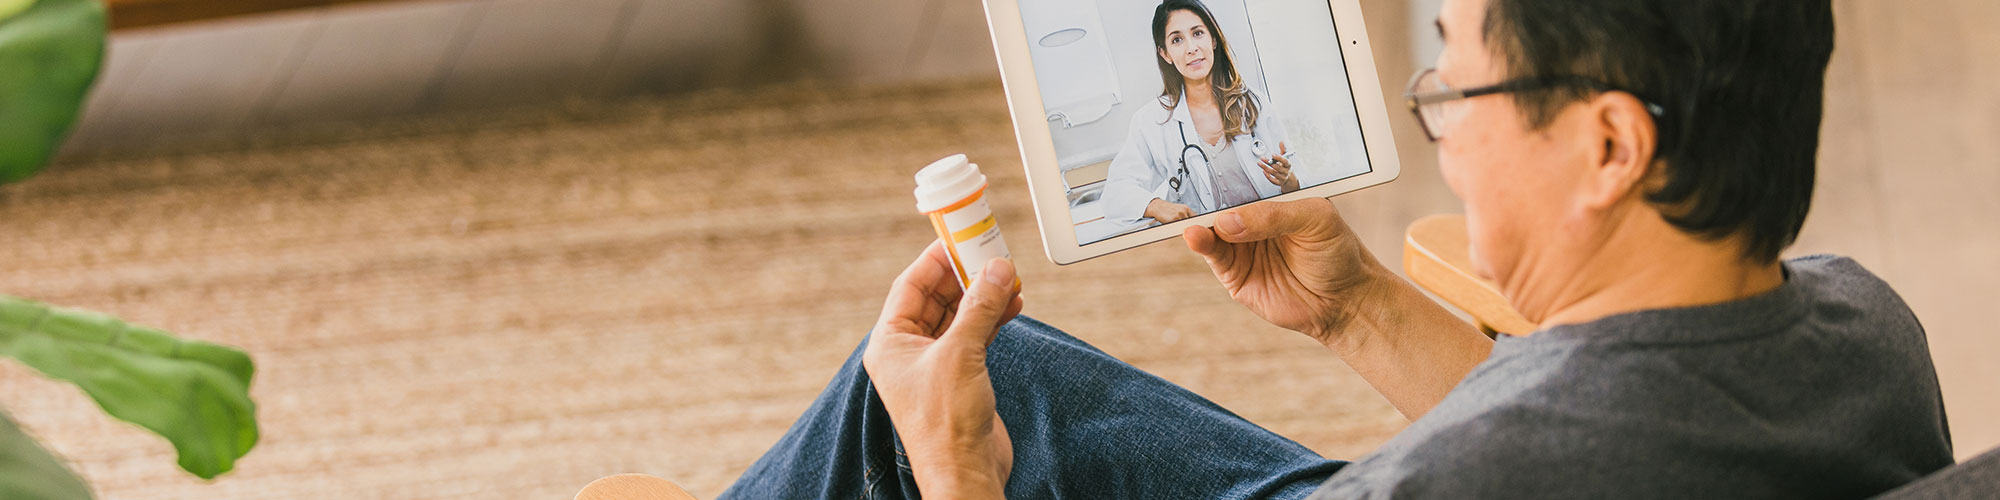 Patient holding bottle of prescribed medication on a telehealth call with provider